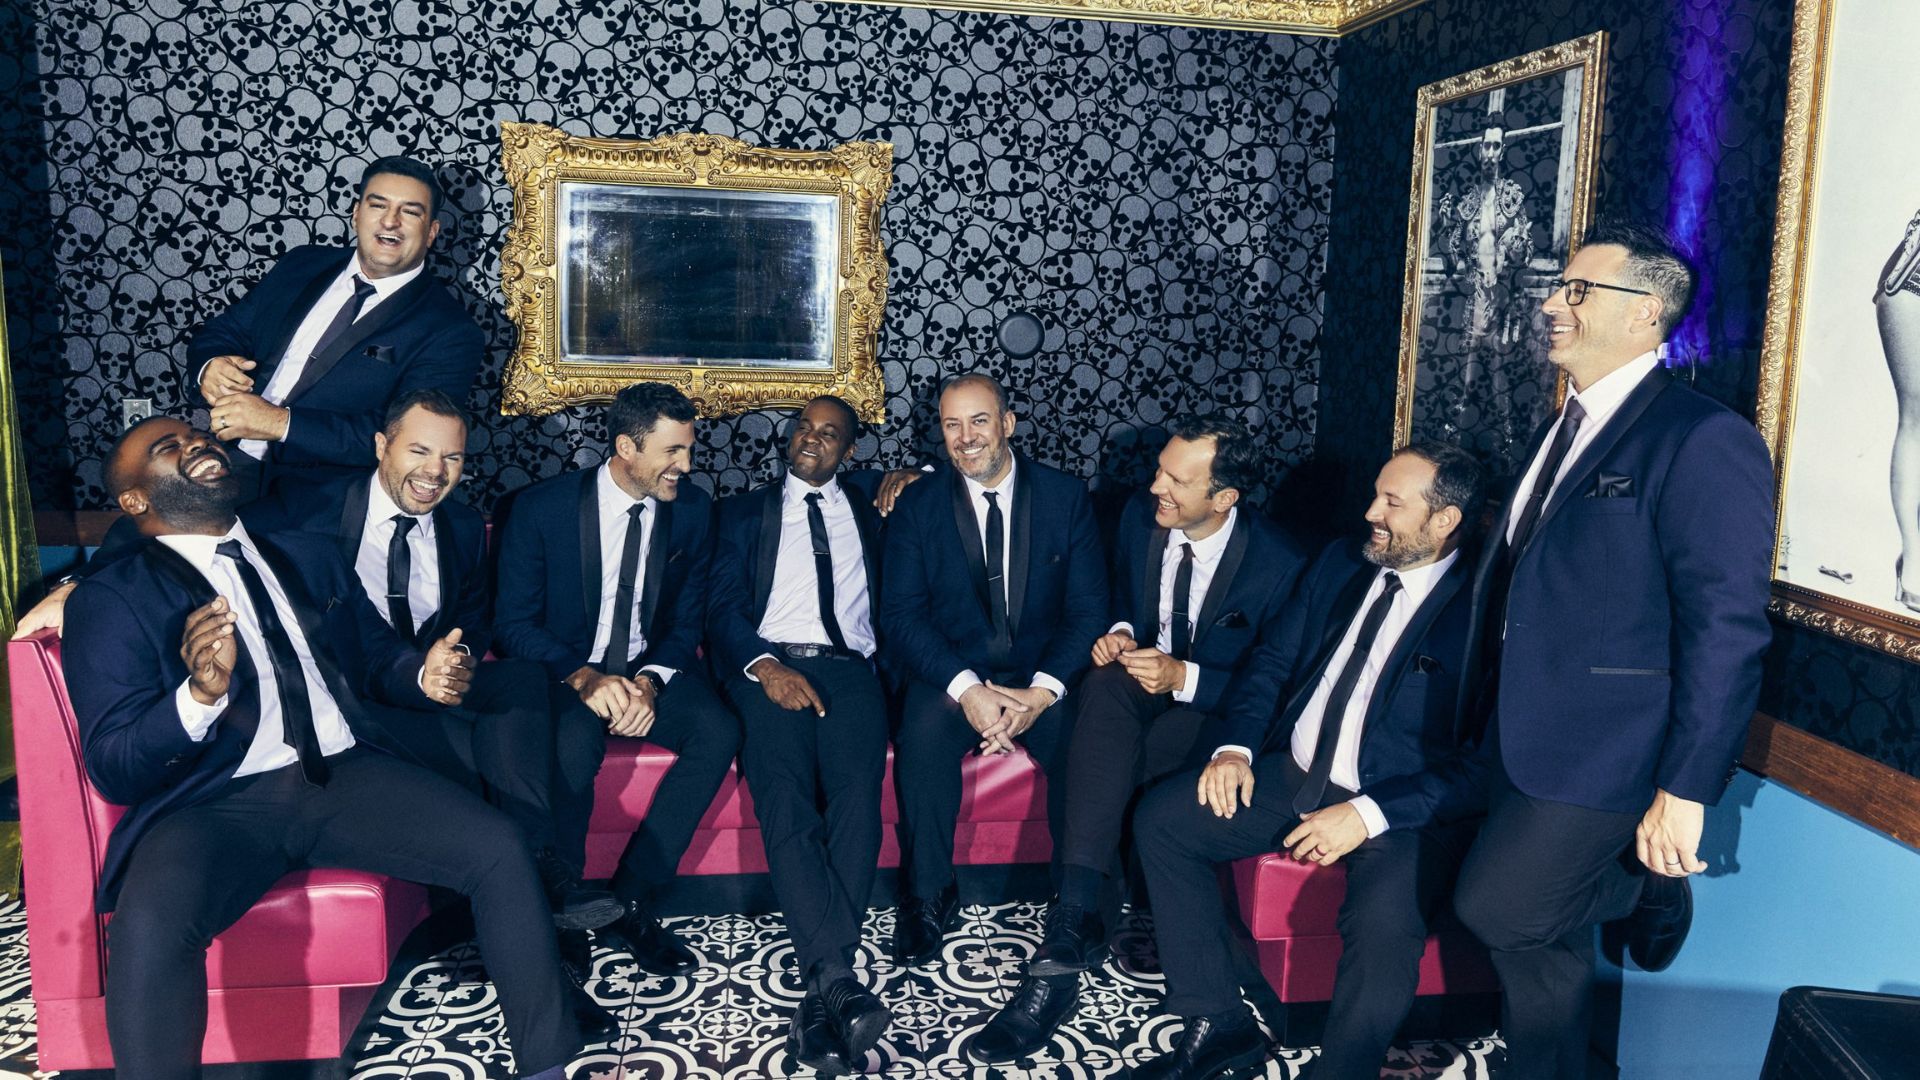 Straight No Chaser will perform at The Fabulous Fox as part of its lineup of theater and performing arts experiences in 2023.